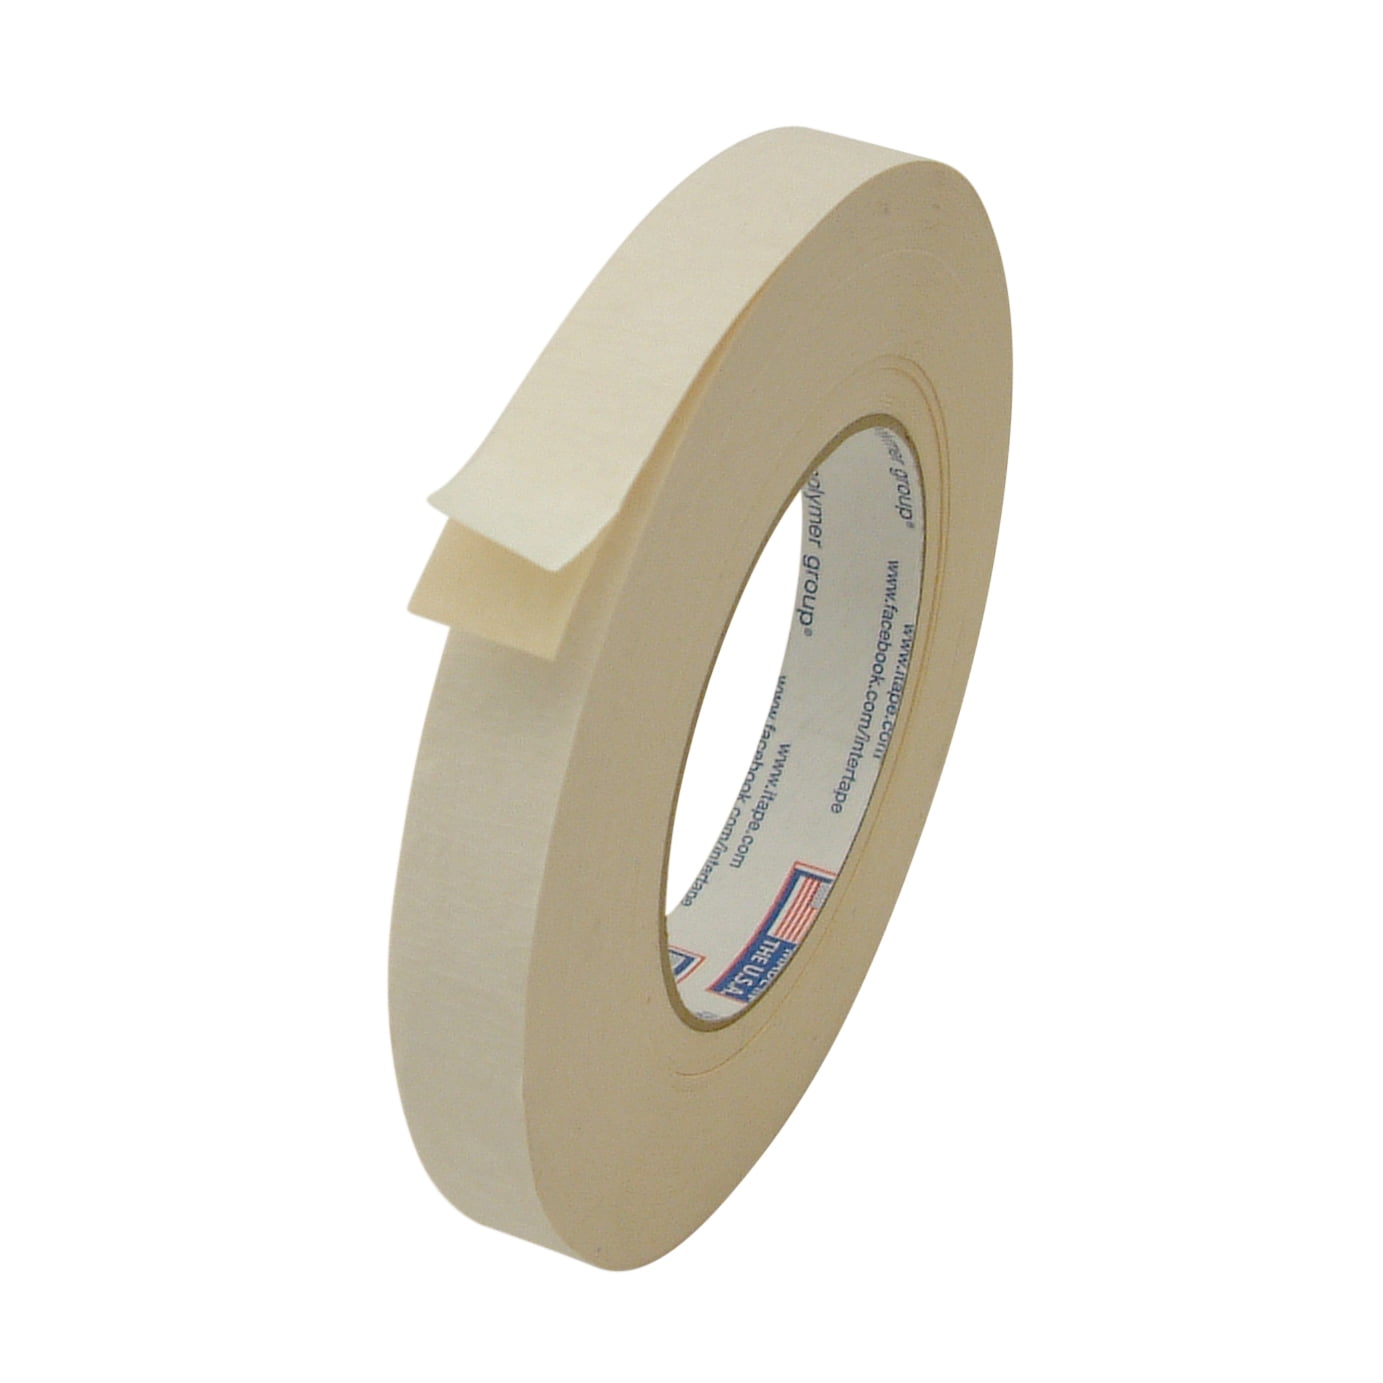 Use For Mounting Parts To Paint Intertape 591 1/2" Wide Double-Coated Tape 